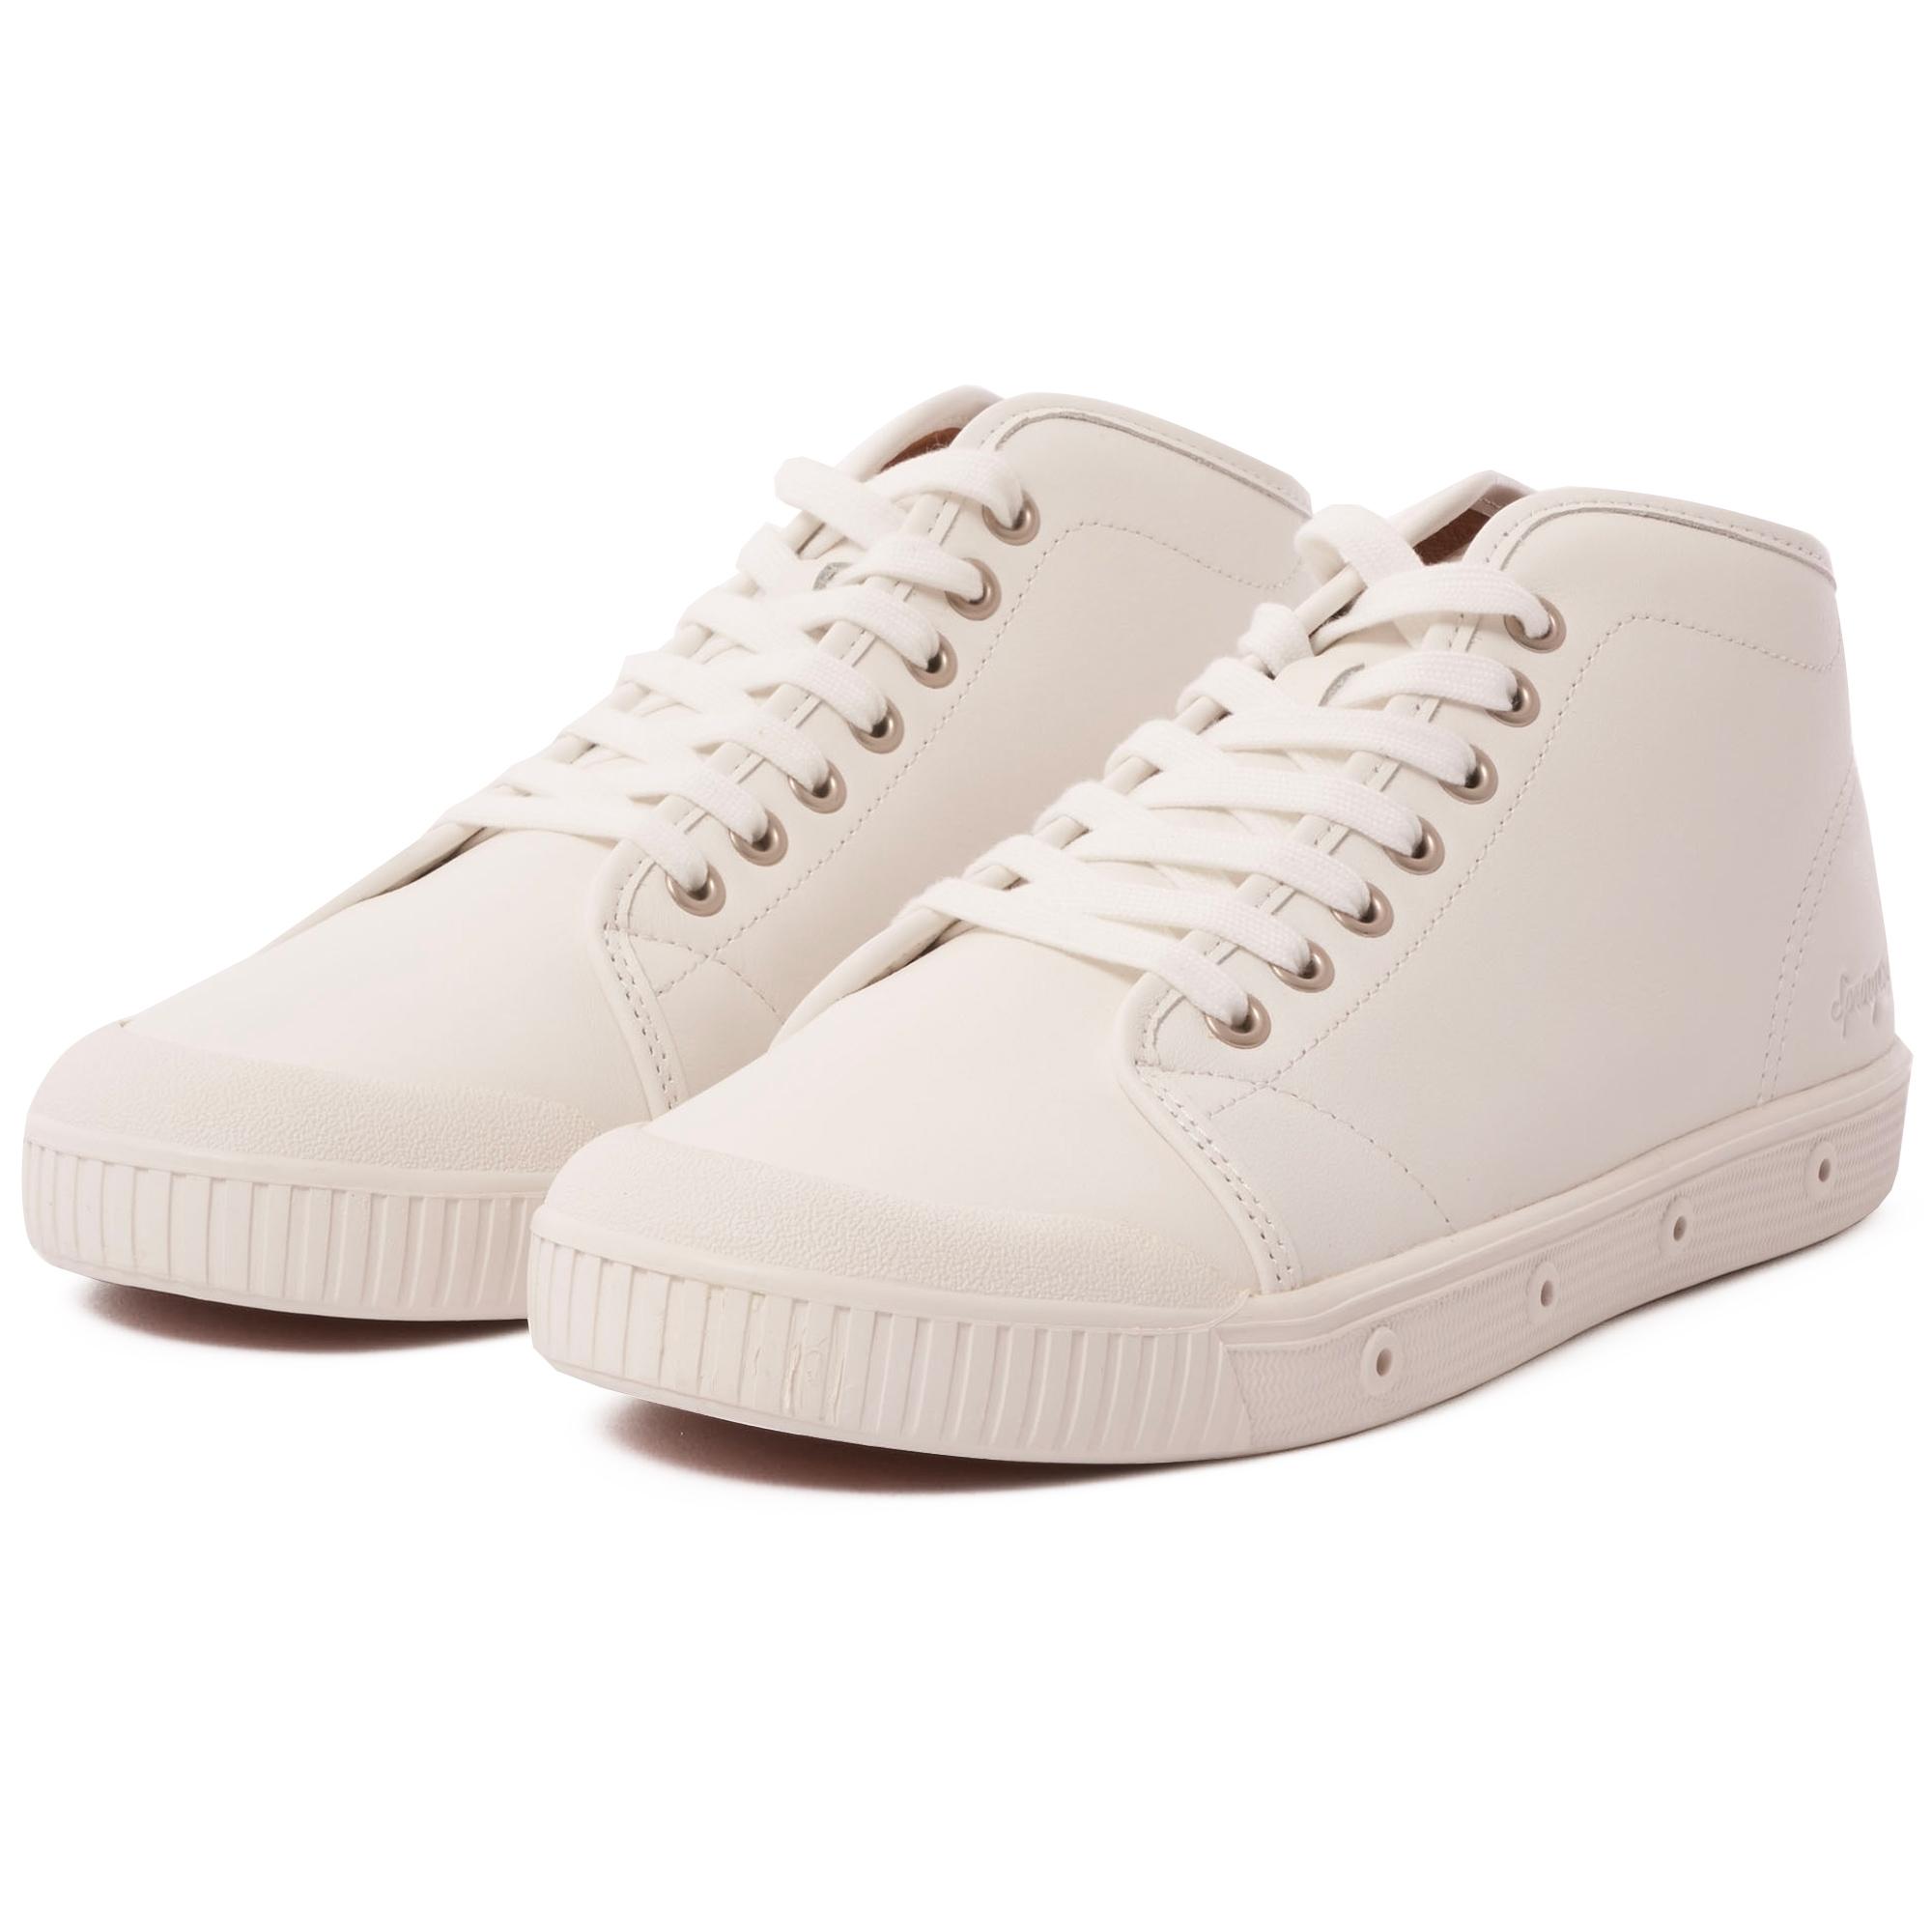 Spring Court Classic B2 Leather Shoes in White for Men - Lyst